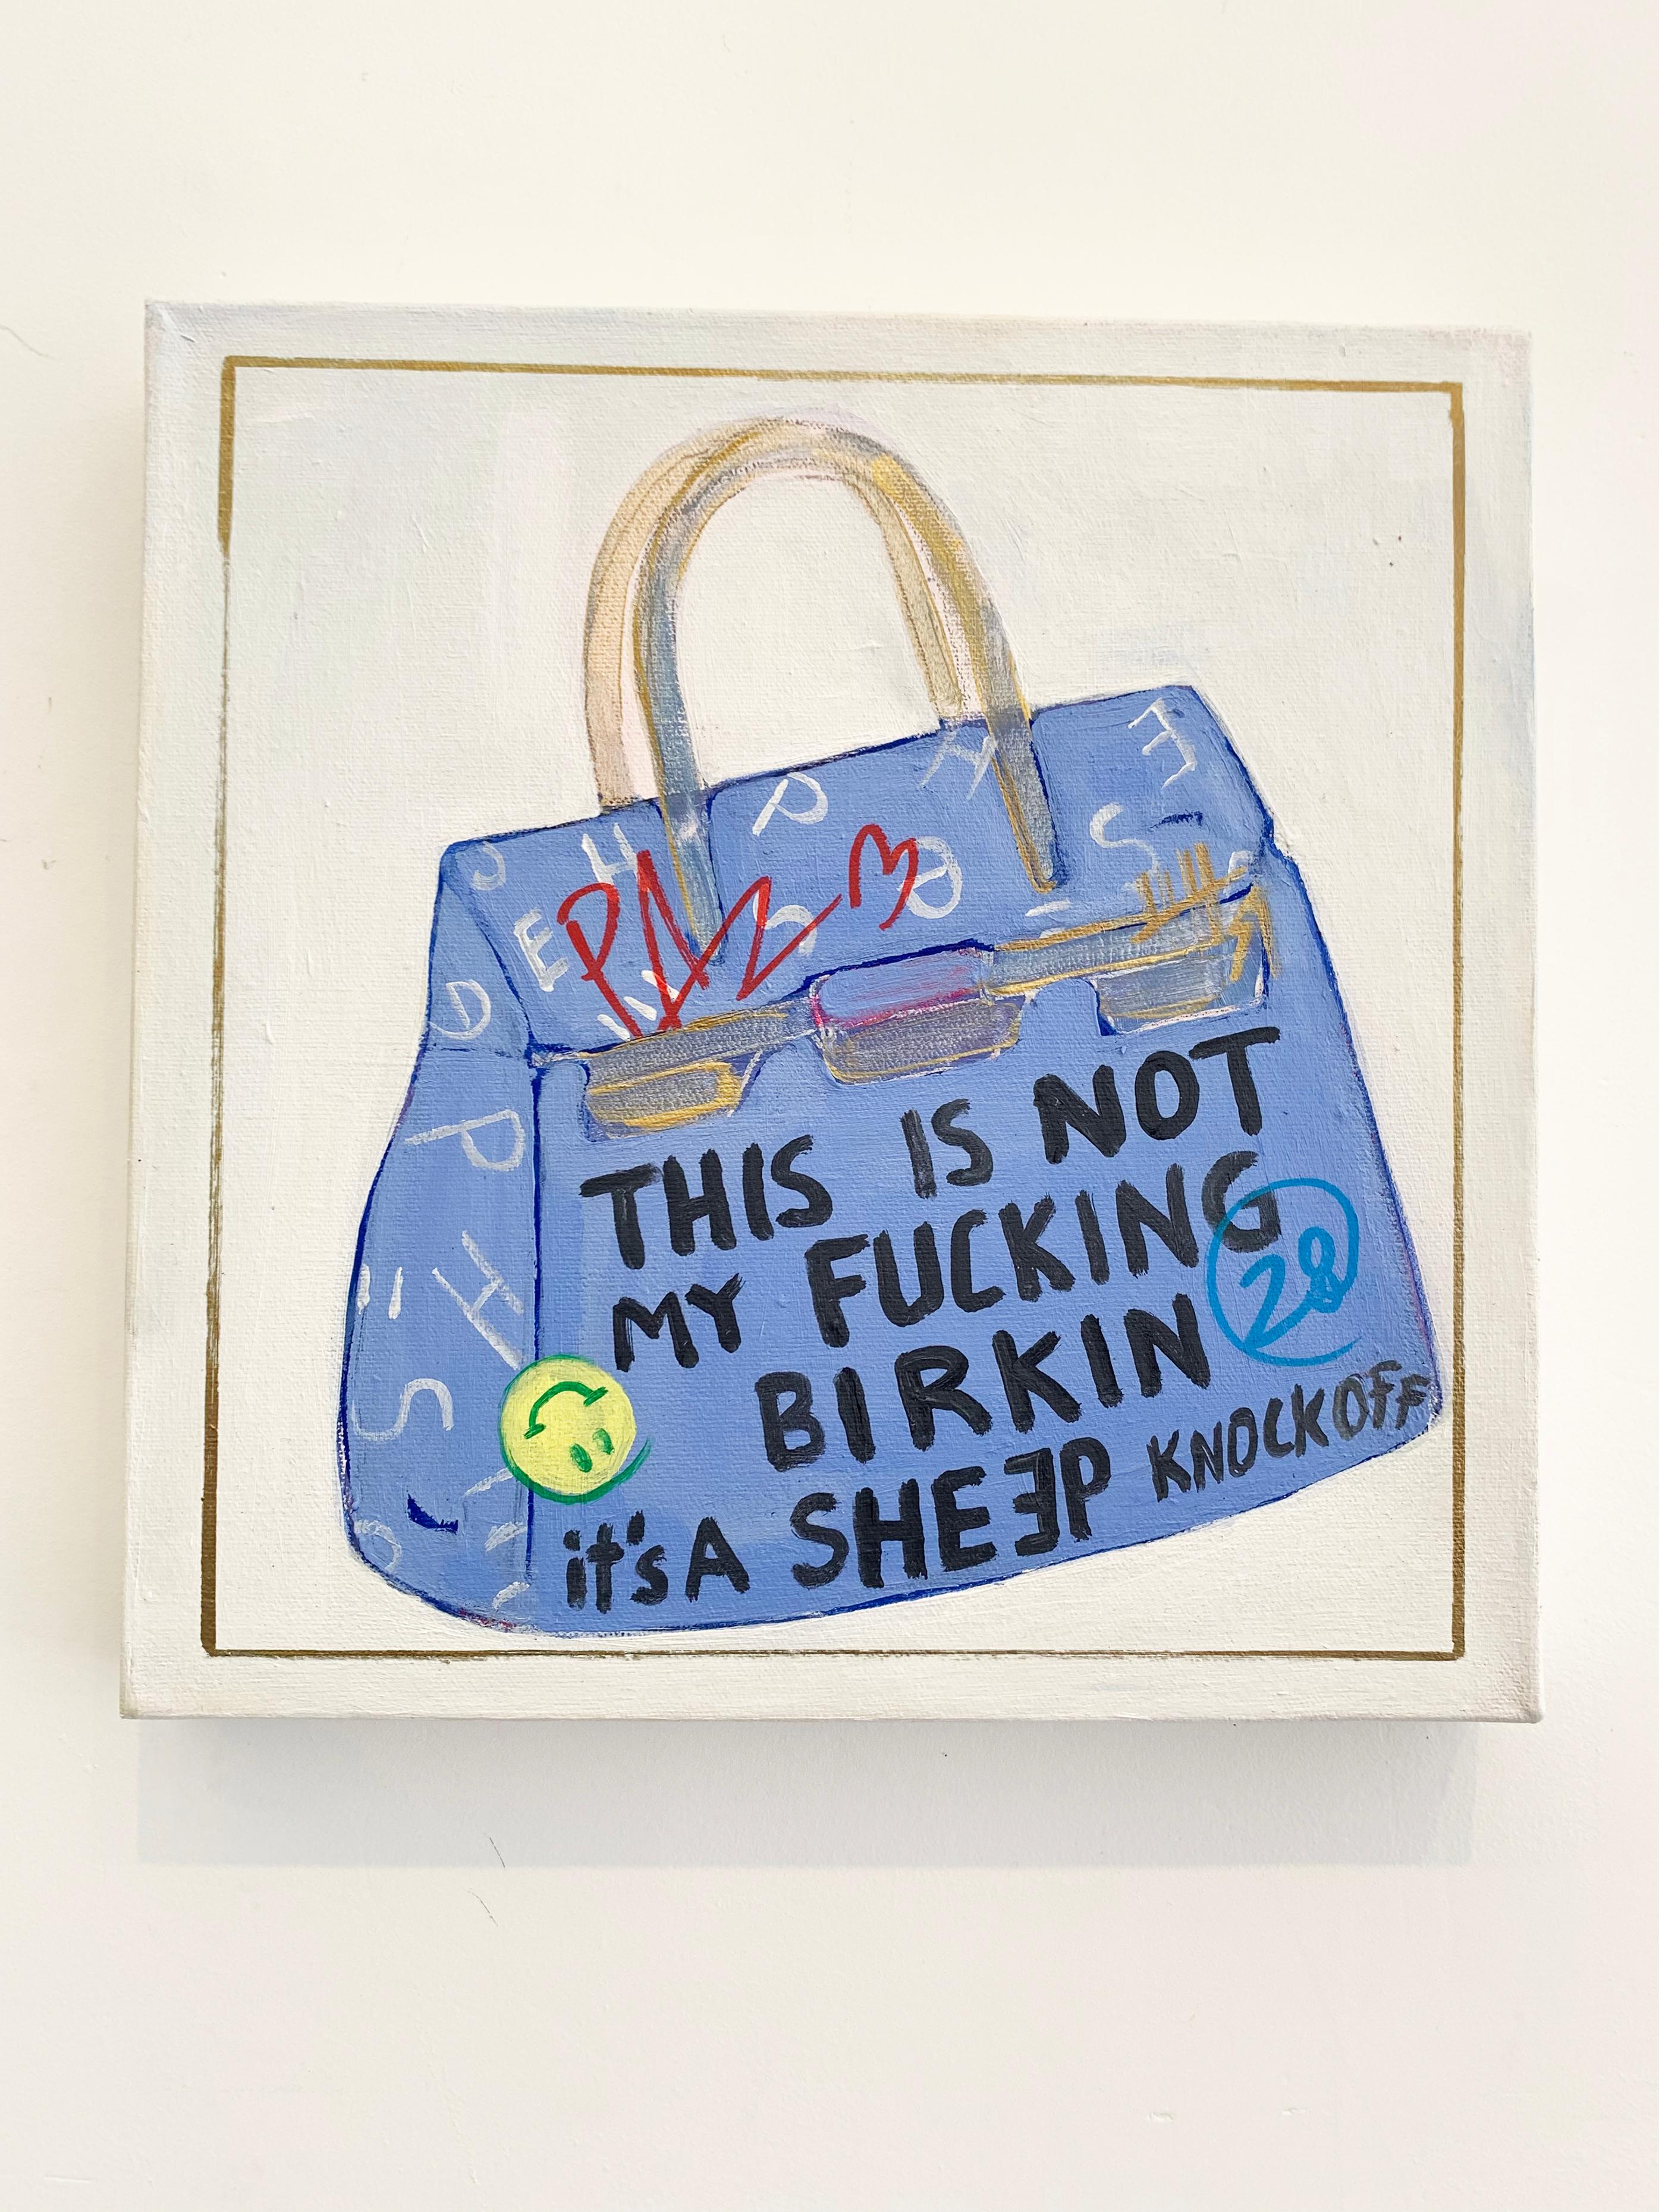 This is Not My F... Birkin, It's my Sheep Knockoff - Acrylic on Wood - Painting by Little Ricky